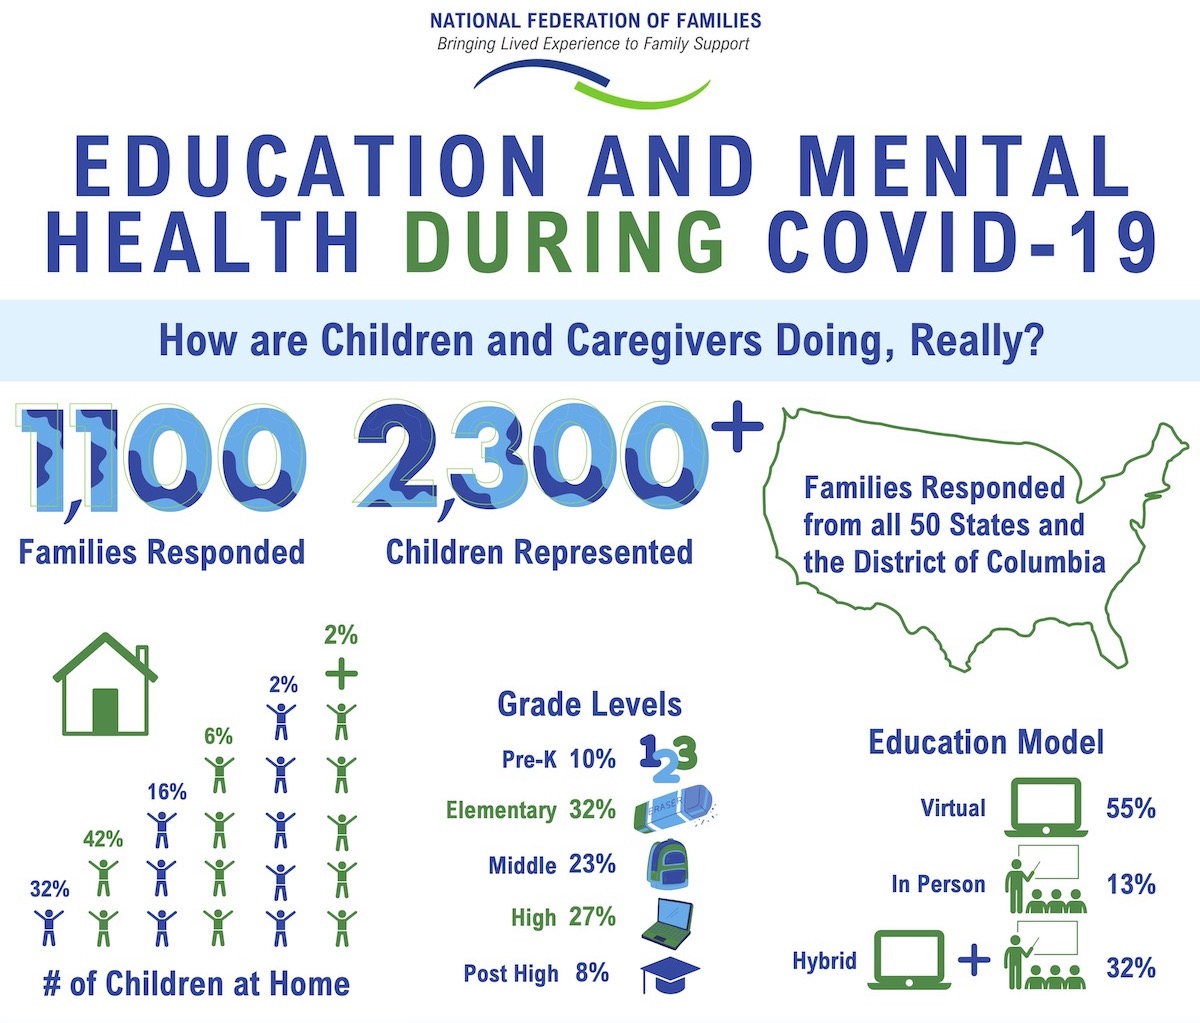 Education and Mental Health During COVID-19 - Infographic